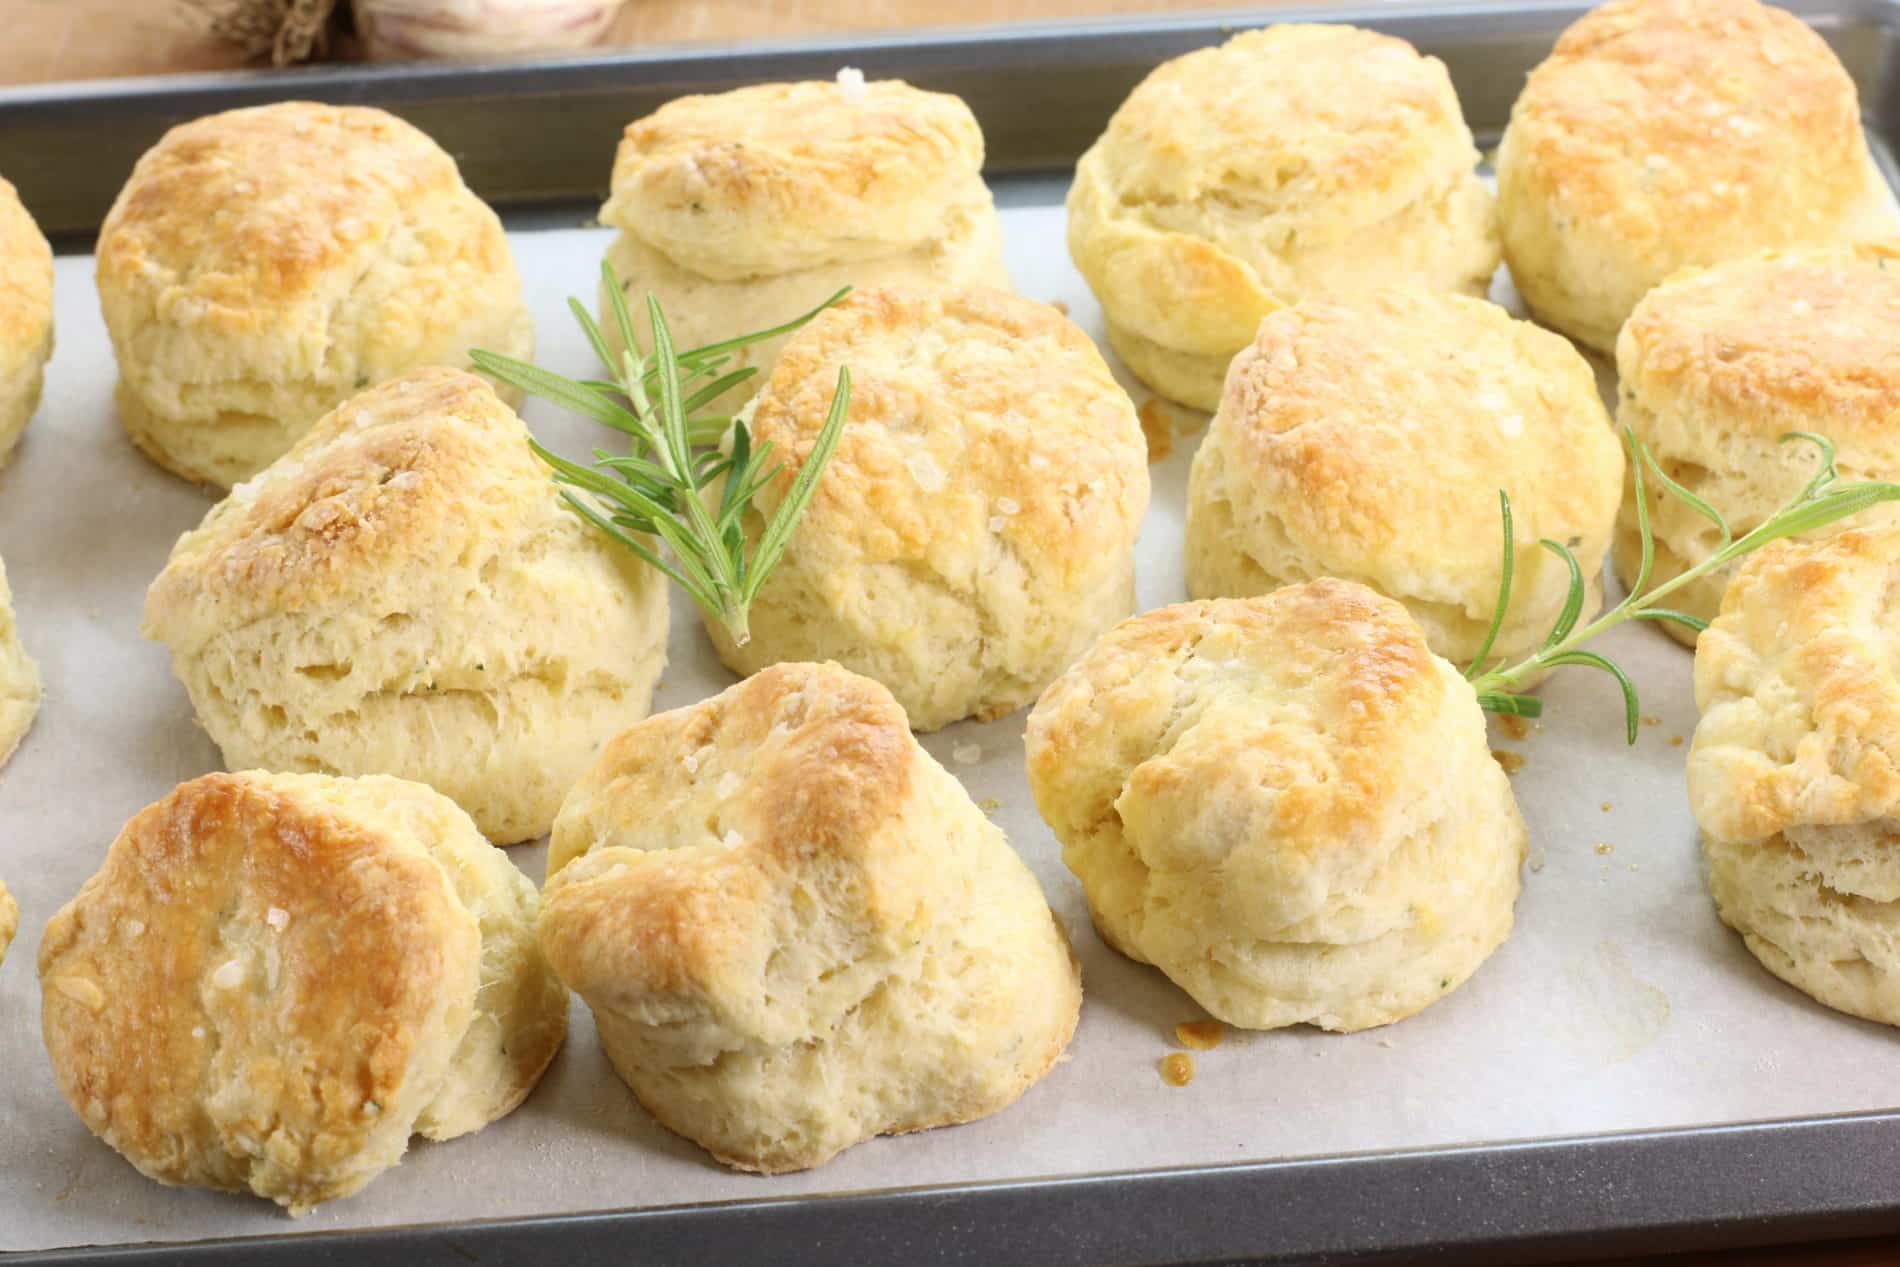 freshly baked biscuits infused with garlic and rosemary